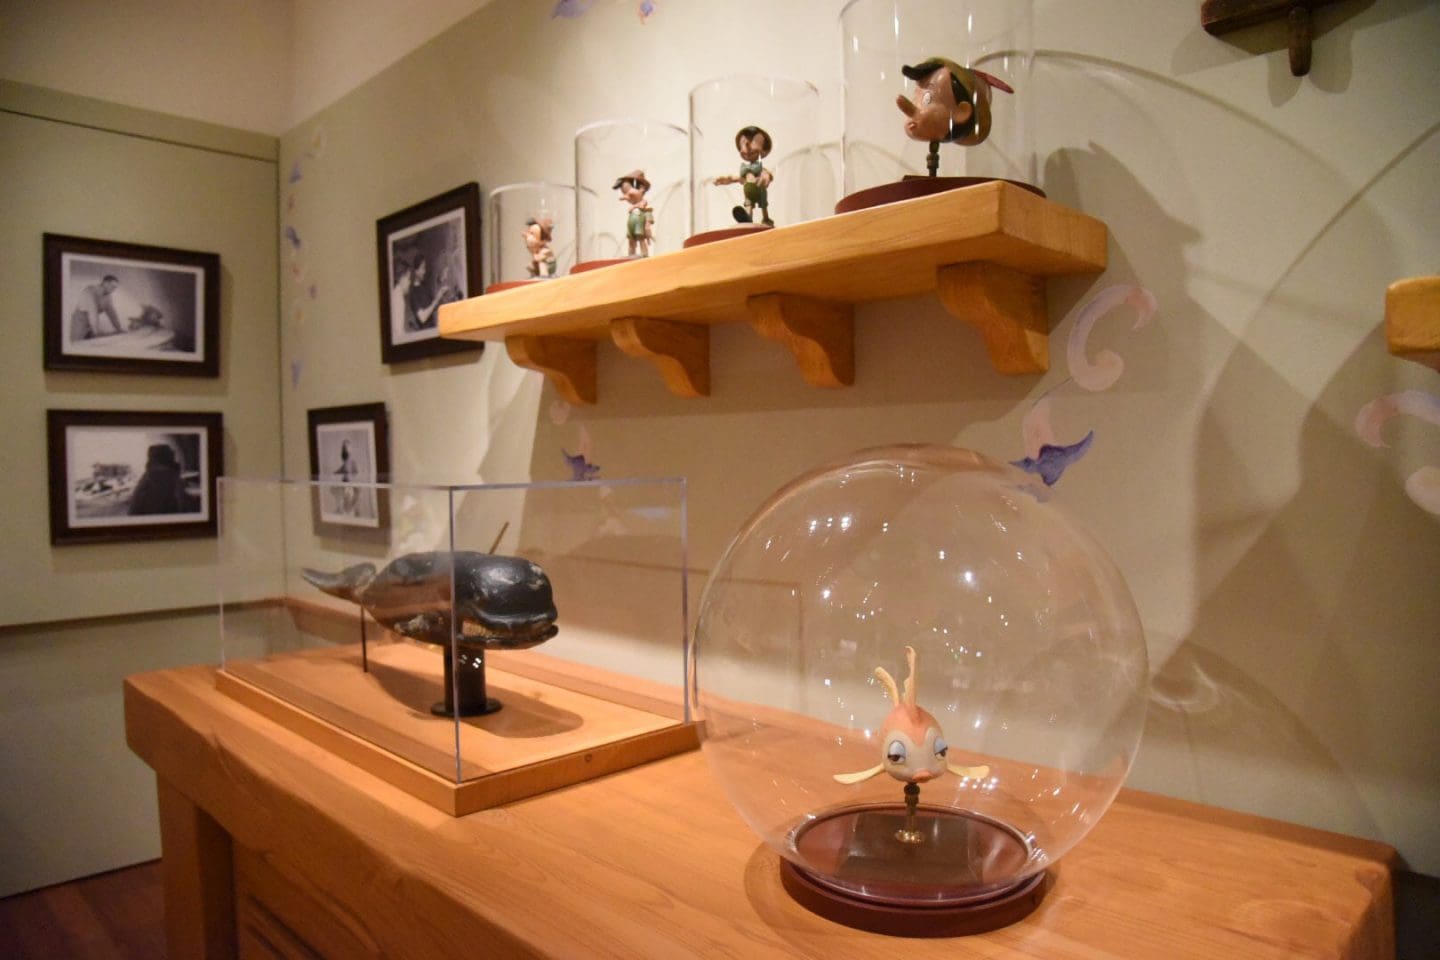 The Gepetto's Workshop section of the exhibit displays original maquettes created during the production of the film.